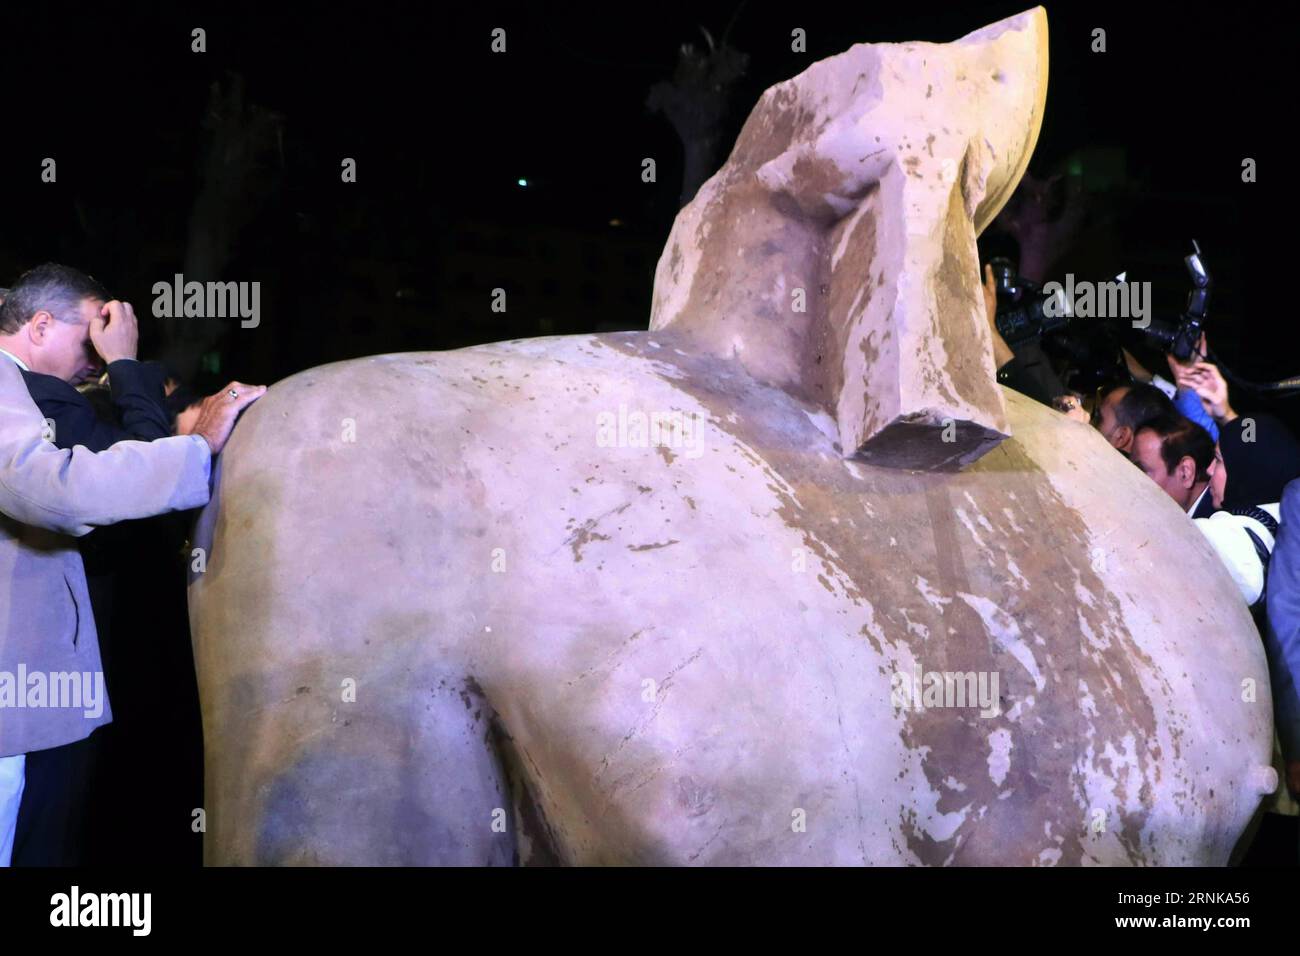 Kairo: Pressetermin zur entdeckten Pharaonenstatue (170316) -- CAIRO, March 16, 2017 -- A royal colossus is seen during a press conference announcing the transfer of its parts to the Egyptian Museum in Cairo, Egypt, on March 16, 2017. Egyptian minister of antiquities Khaled al-Anany said on Thursday that the royal colossus discovered last week at the Cairo district of Matariya is probably a statue of Psammetich I, a pharaoh from the 26th dynasty who ruled Egypt between 664 and 610 B.C., rather than King Ramses II as believed earlier, according to state-run Ahram Online. ) EGYPT-CAIRO-ARCHEOLOG Stock Photo